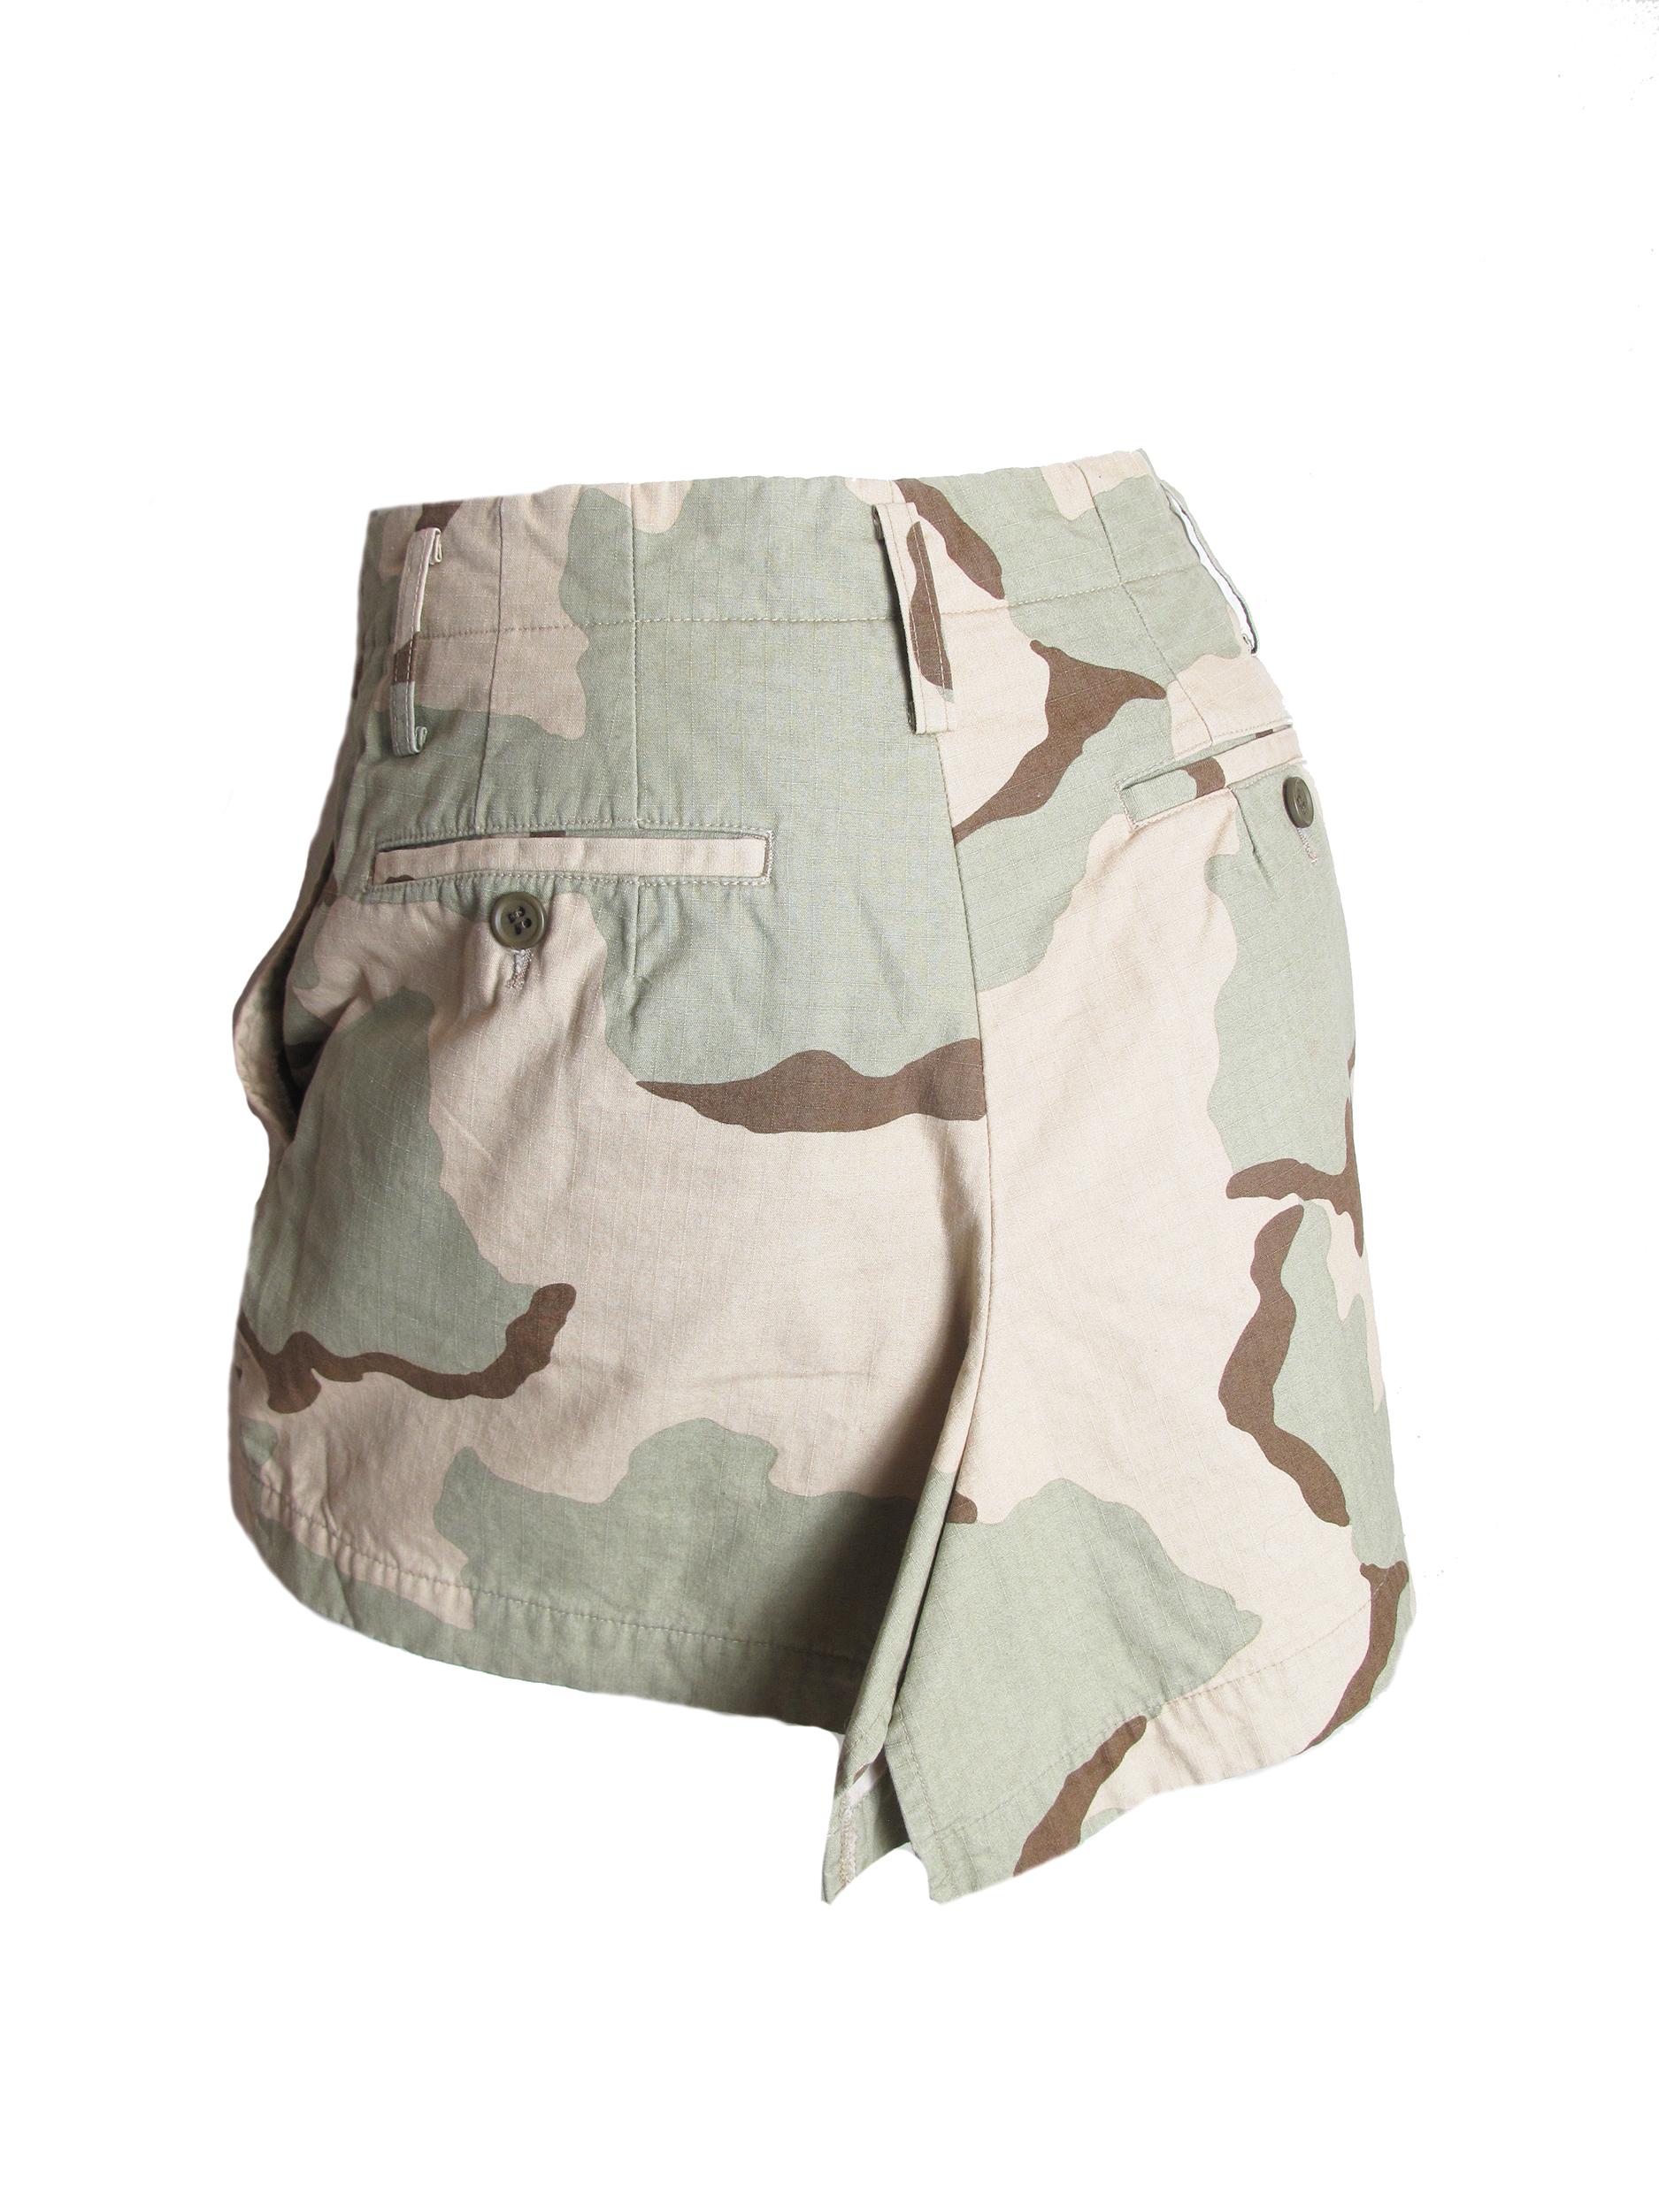 JUNYA WATANABE Camo Mini Skirt, SS 2005. Cotton.  Condition: Excellent.  Size S